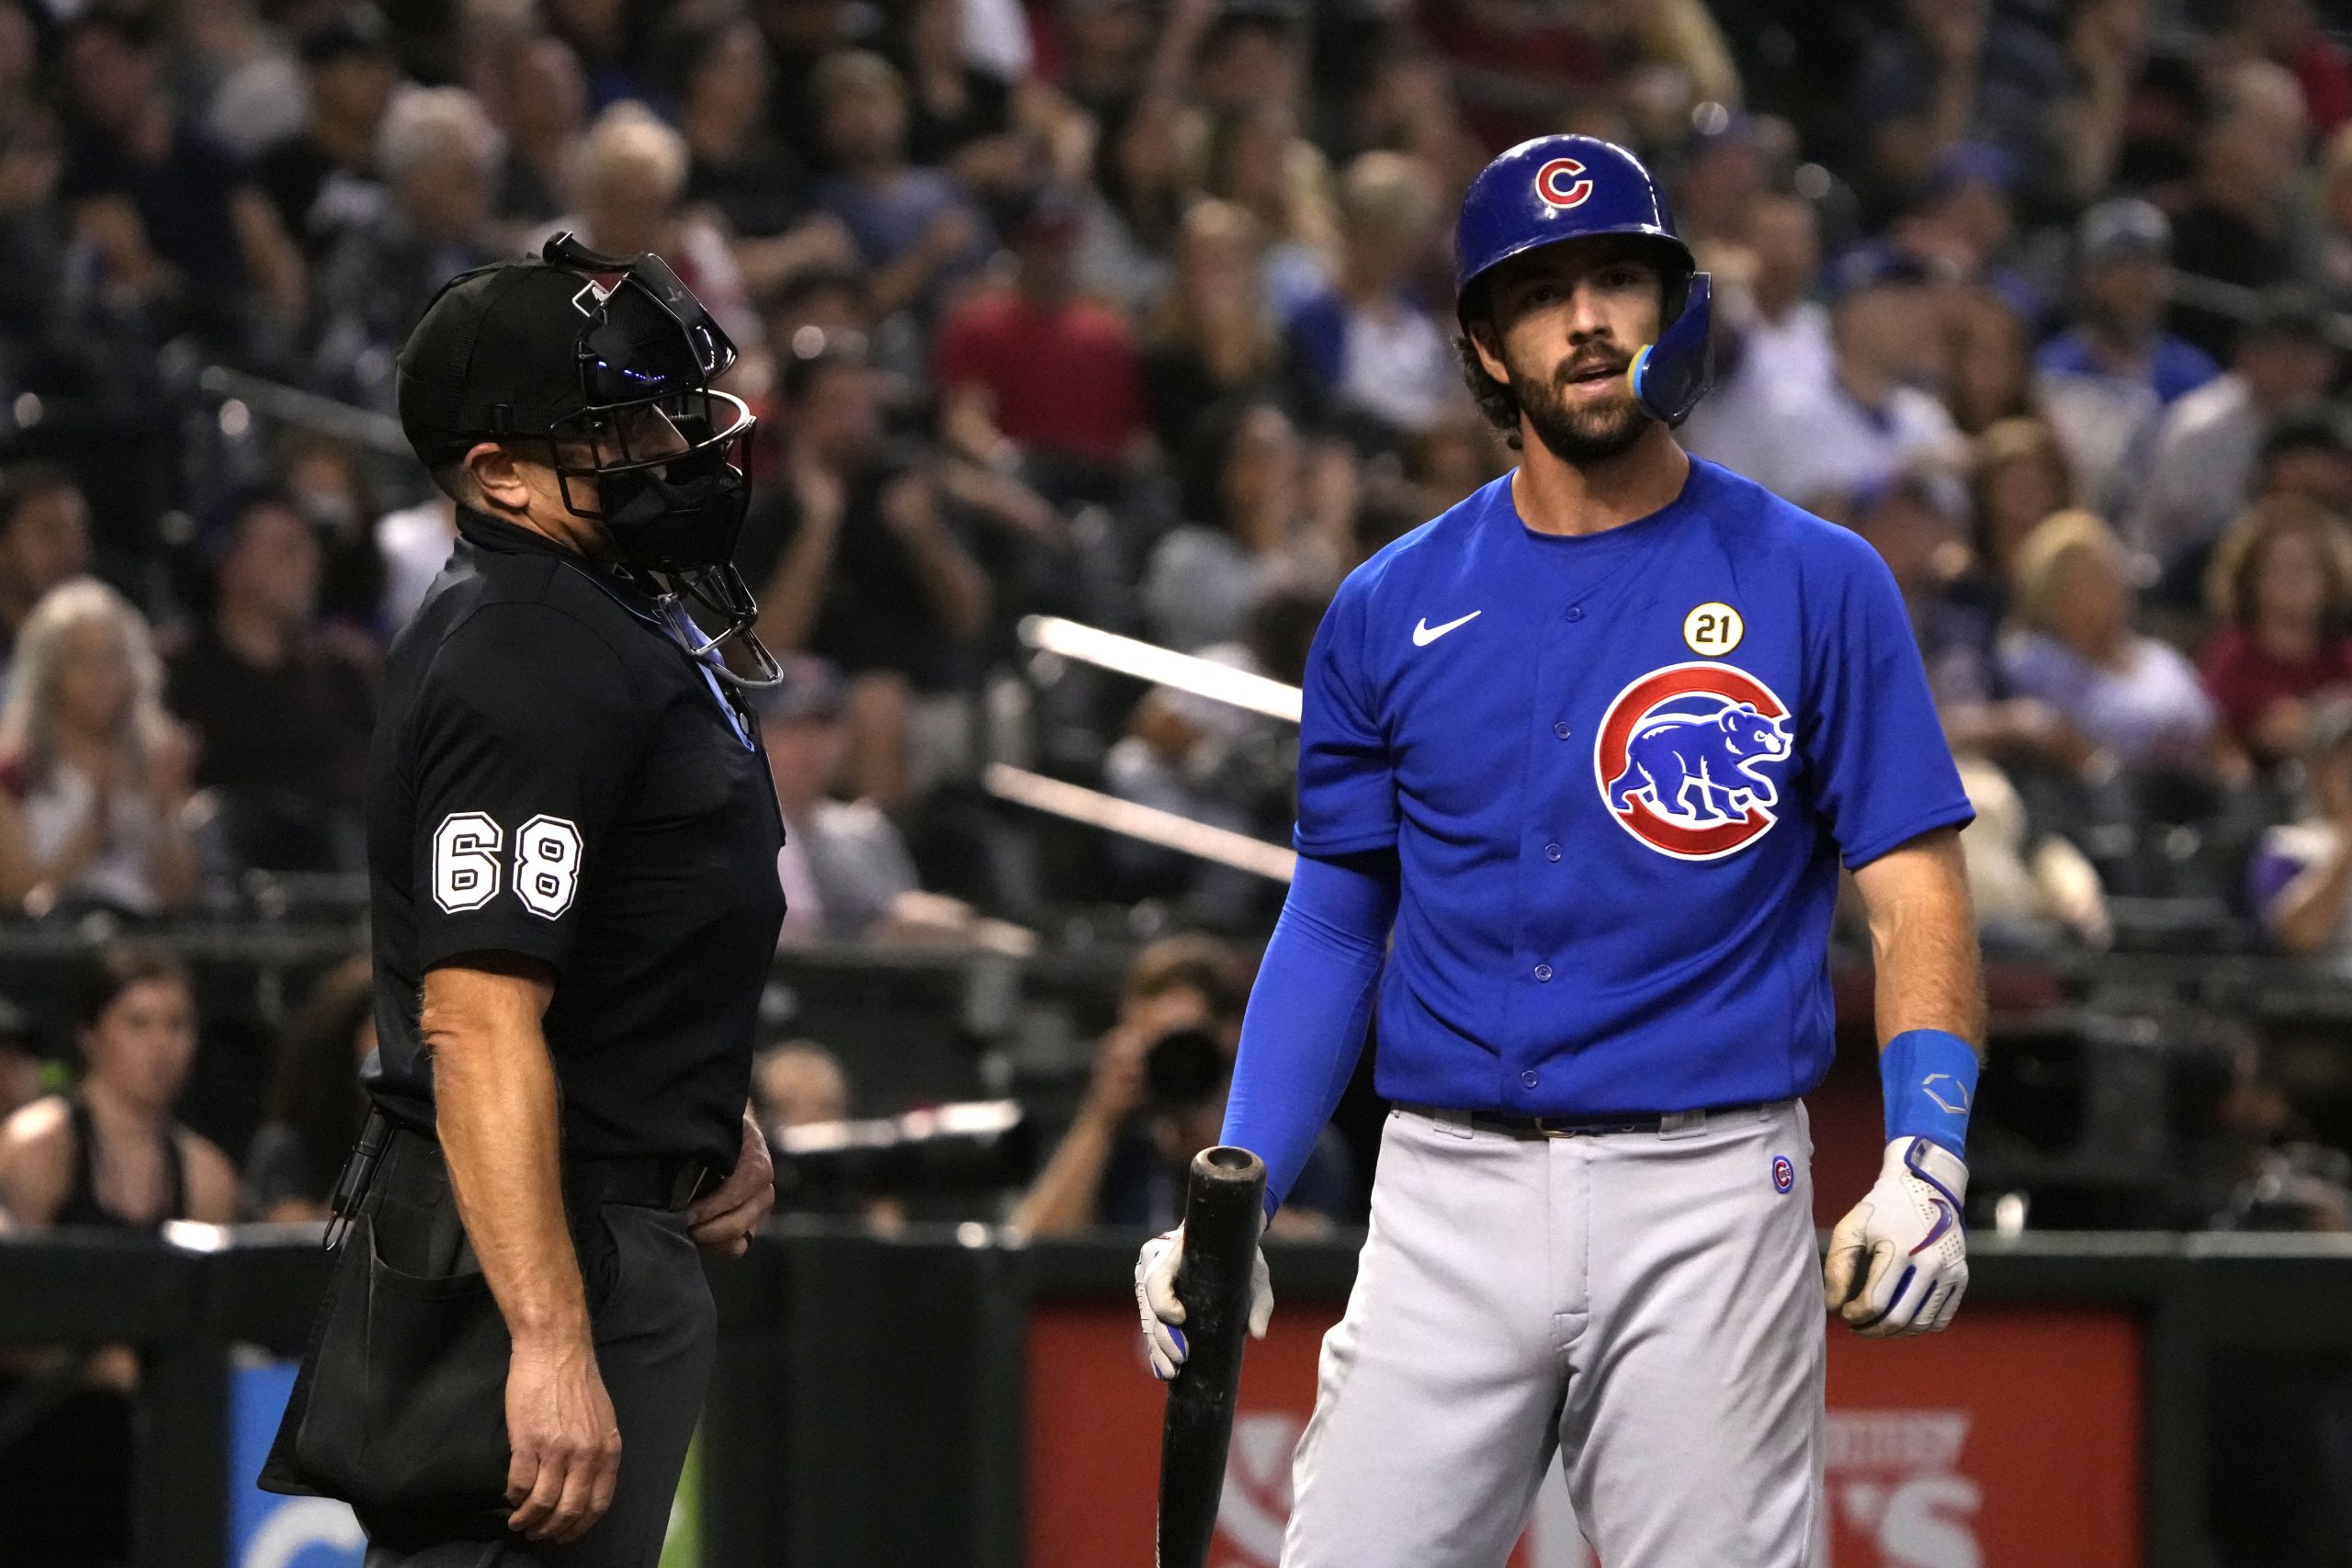 Cubs Expose Marlins as Liars Over Steve Bartman Promotion